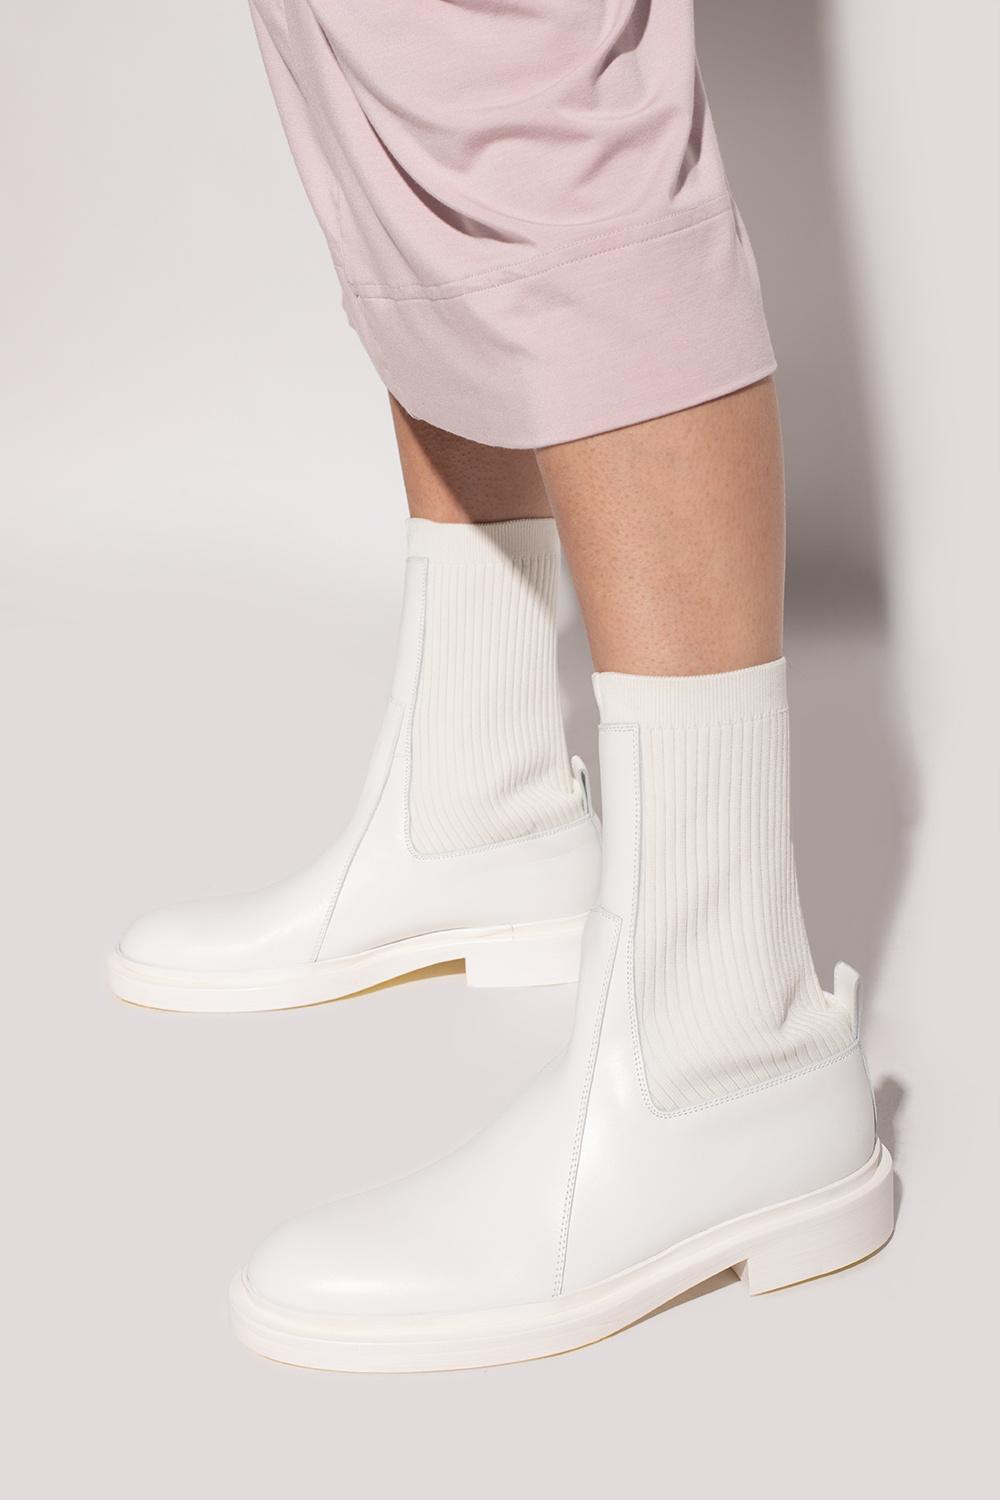 Jil Sander Leather 'chelsea' Boots in White - Lyst